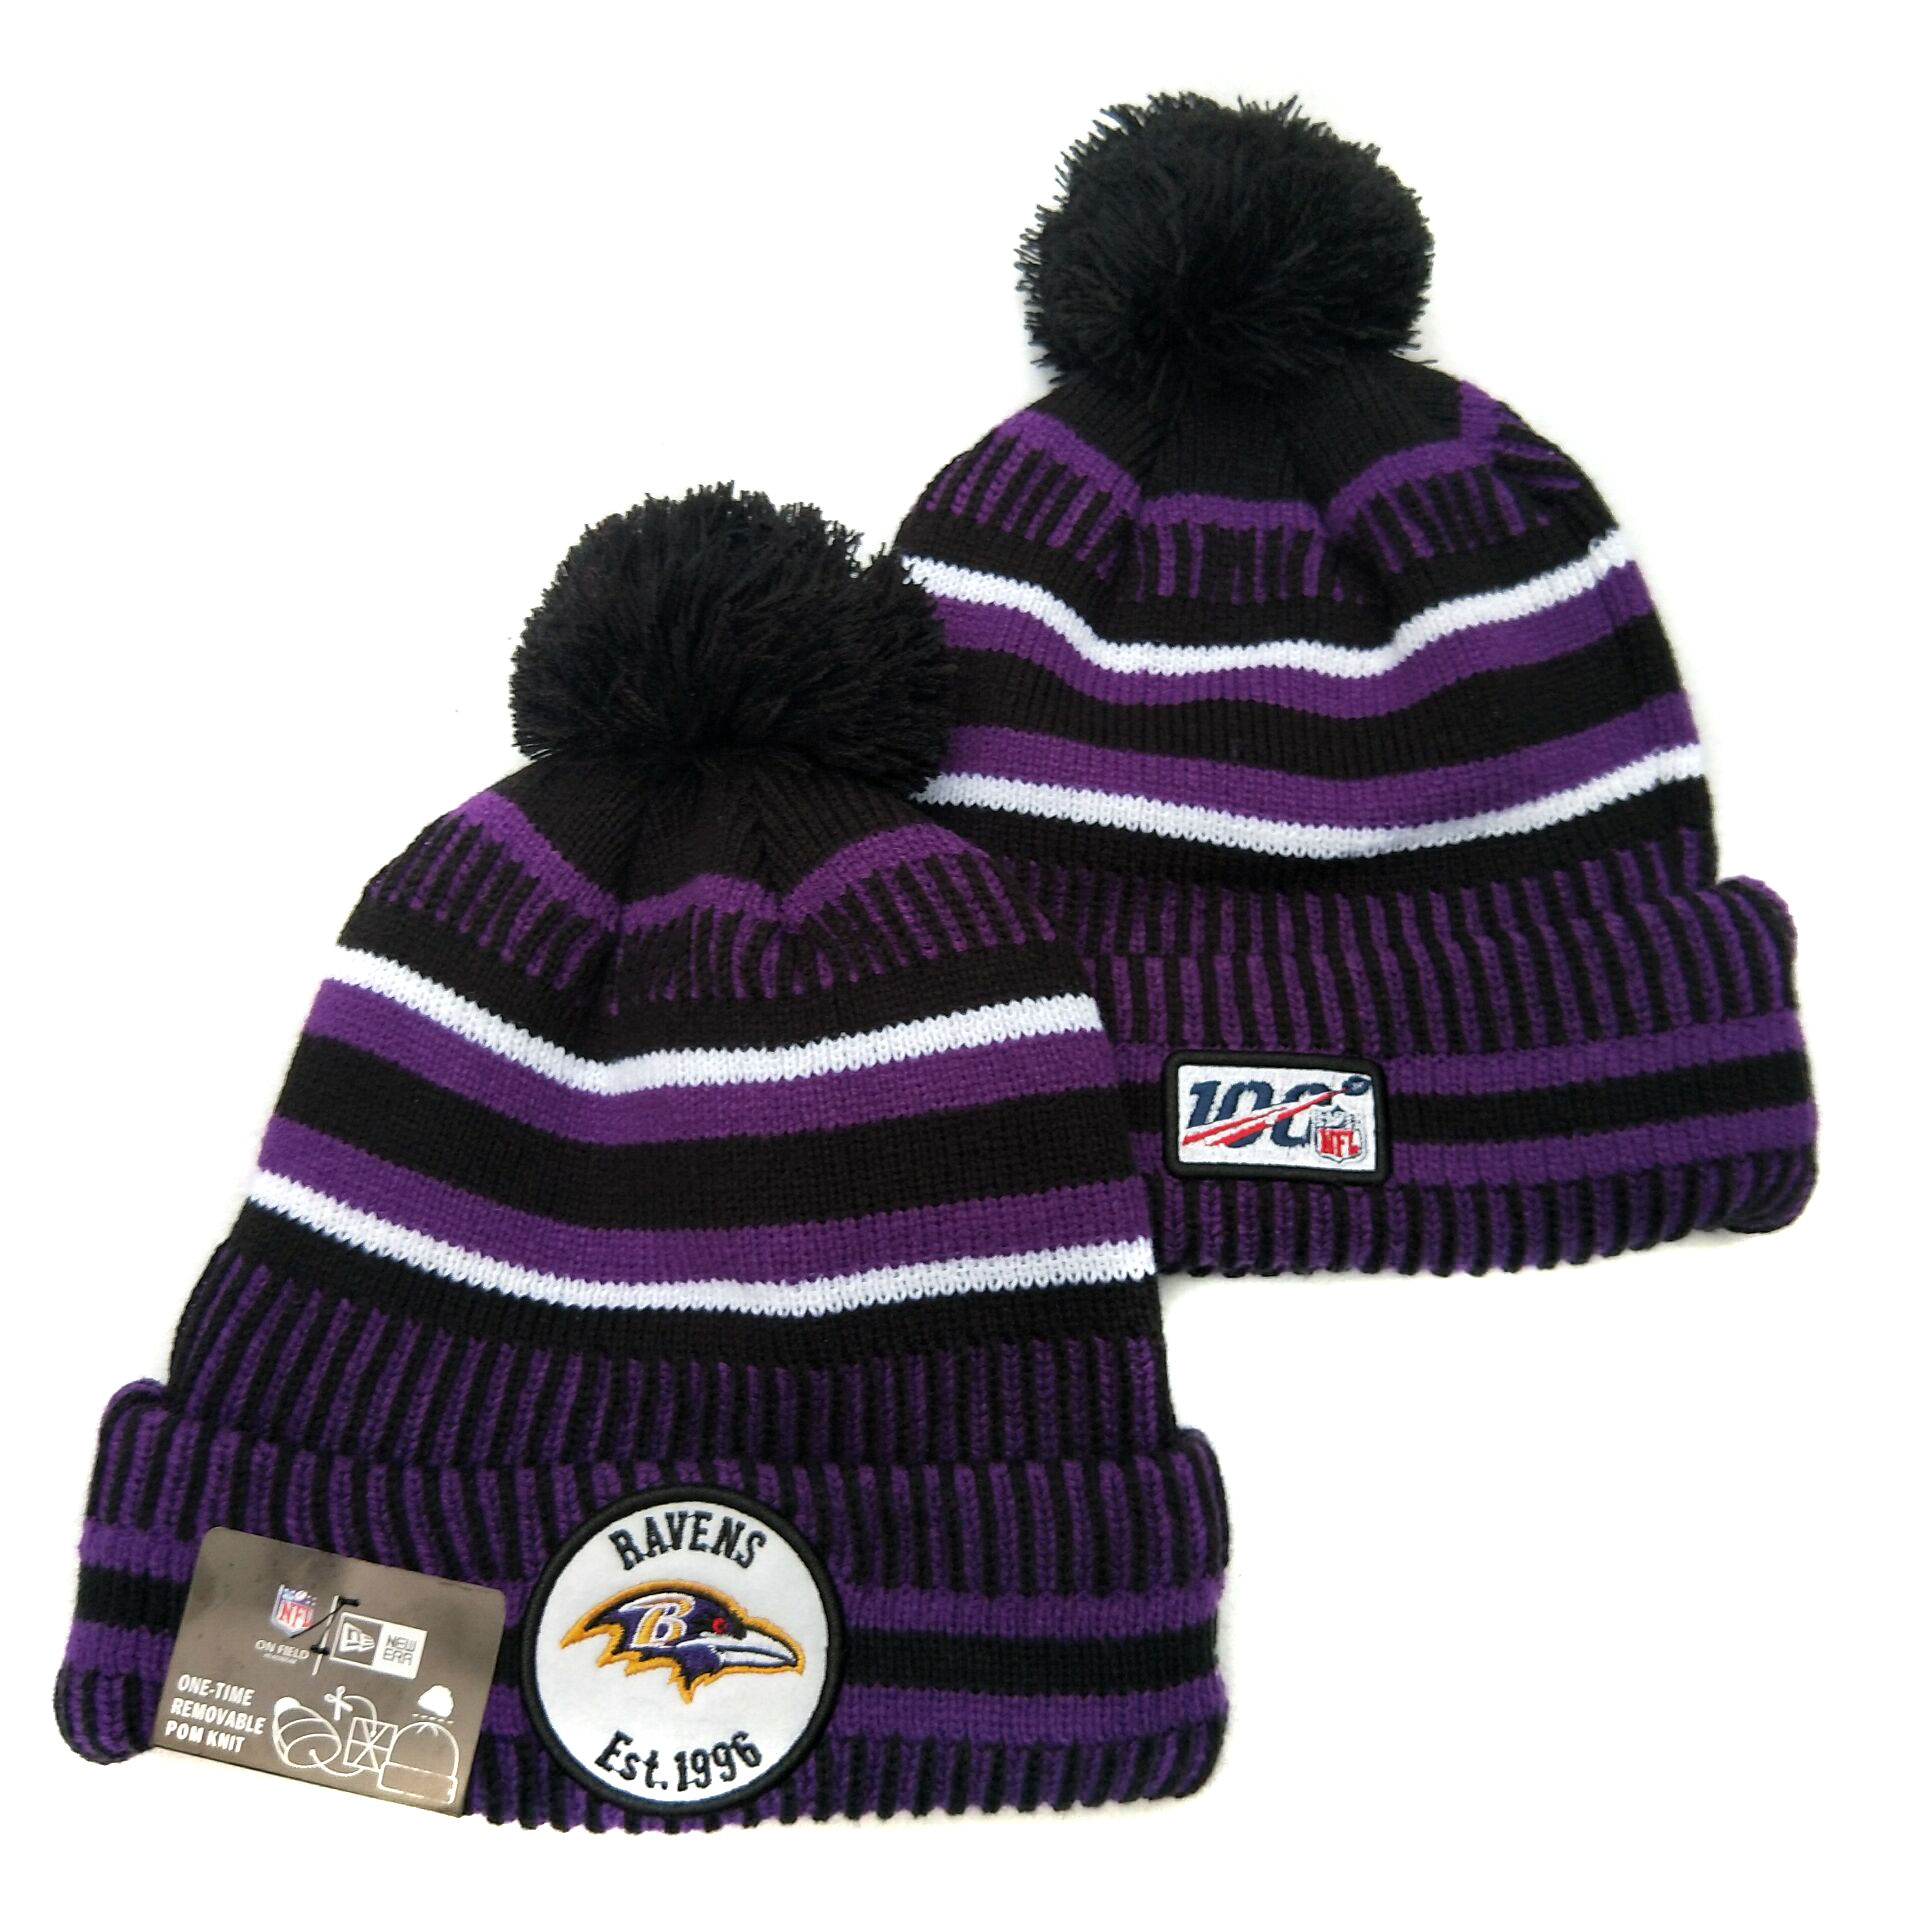 NFL Baltimore Ravens Beanies Knit Hats-YD1198